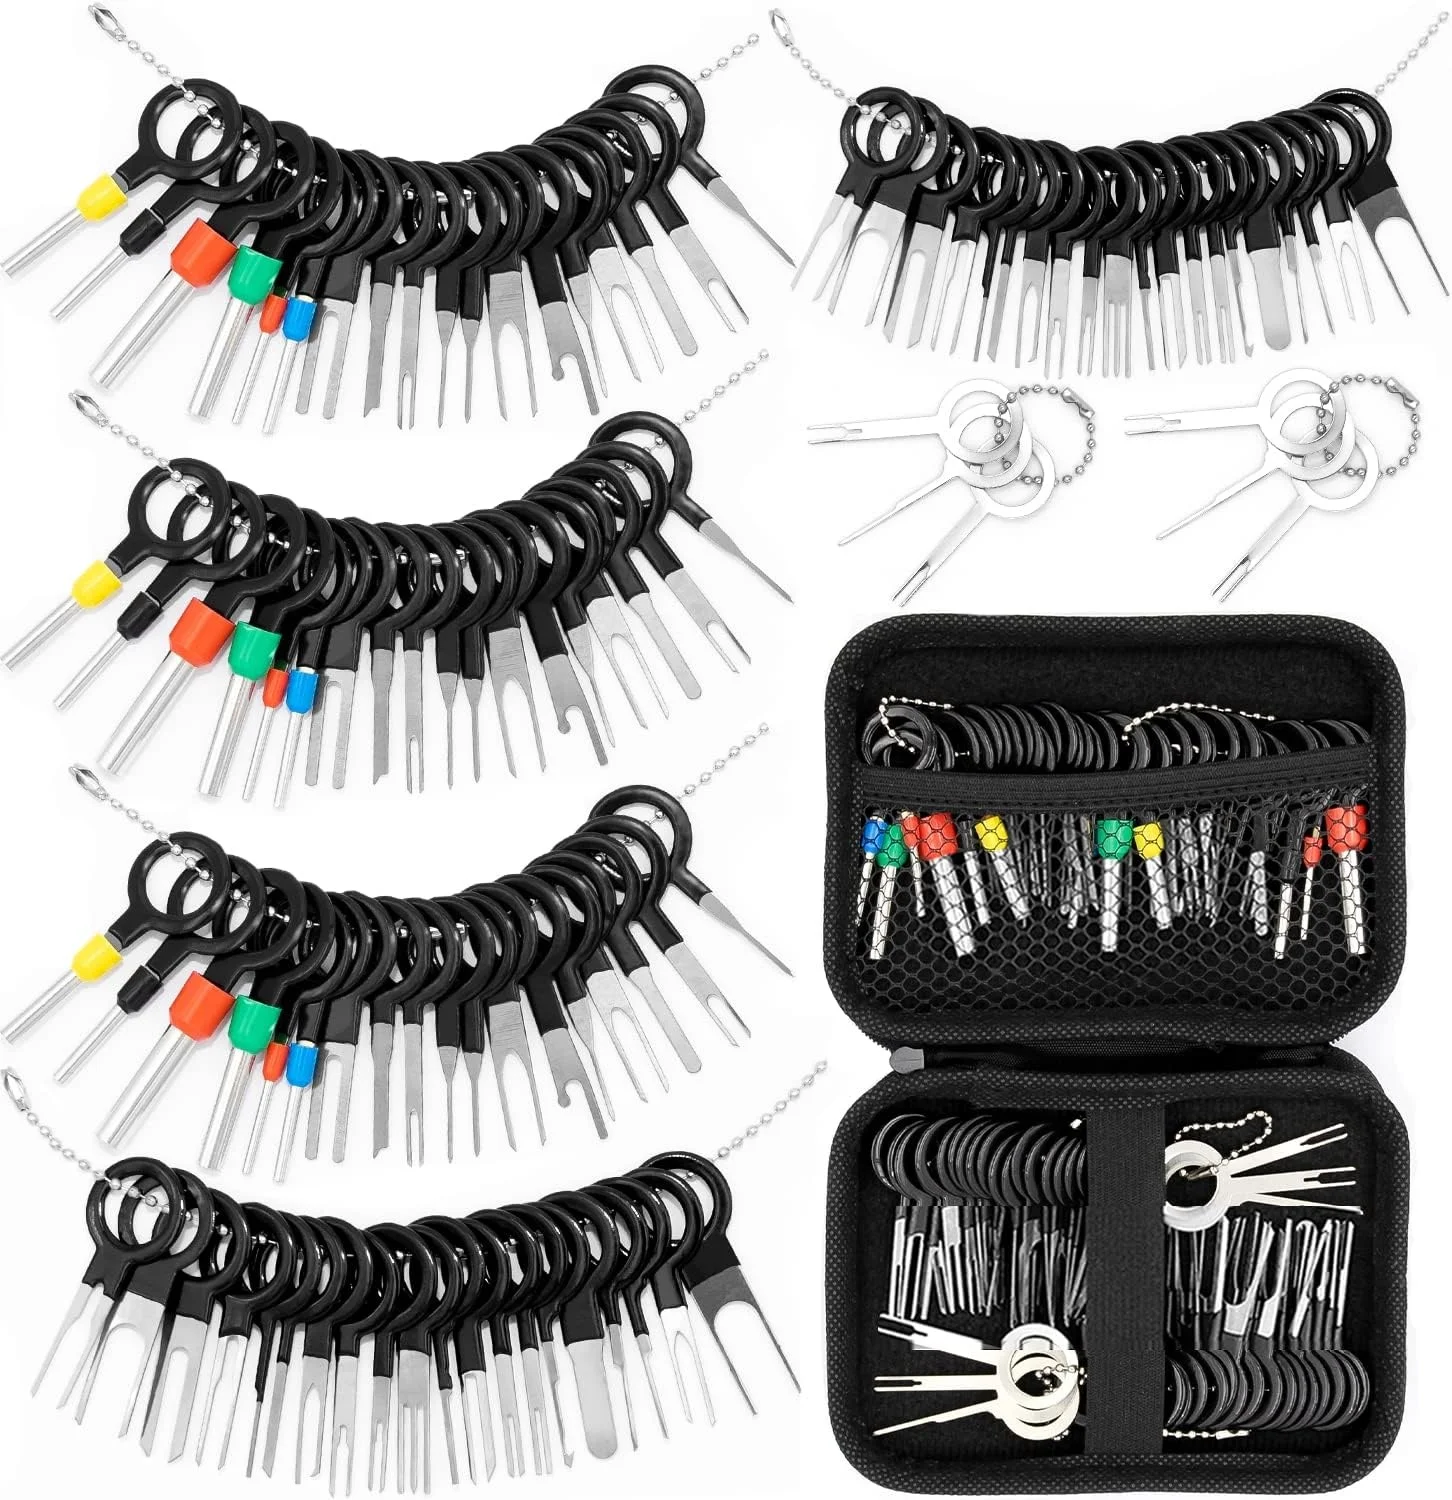 

82Pcs Terminal Removal Tool Automotive Pins Puller Repair Remove Tools Kit for Car Pin Extractor Electrical Wiring Crimp Wires